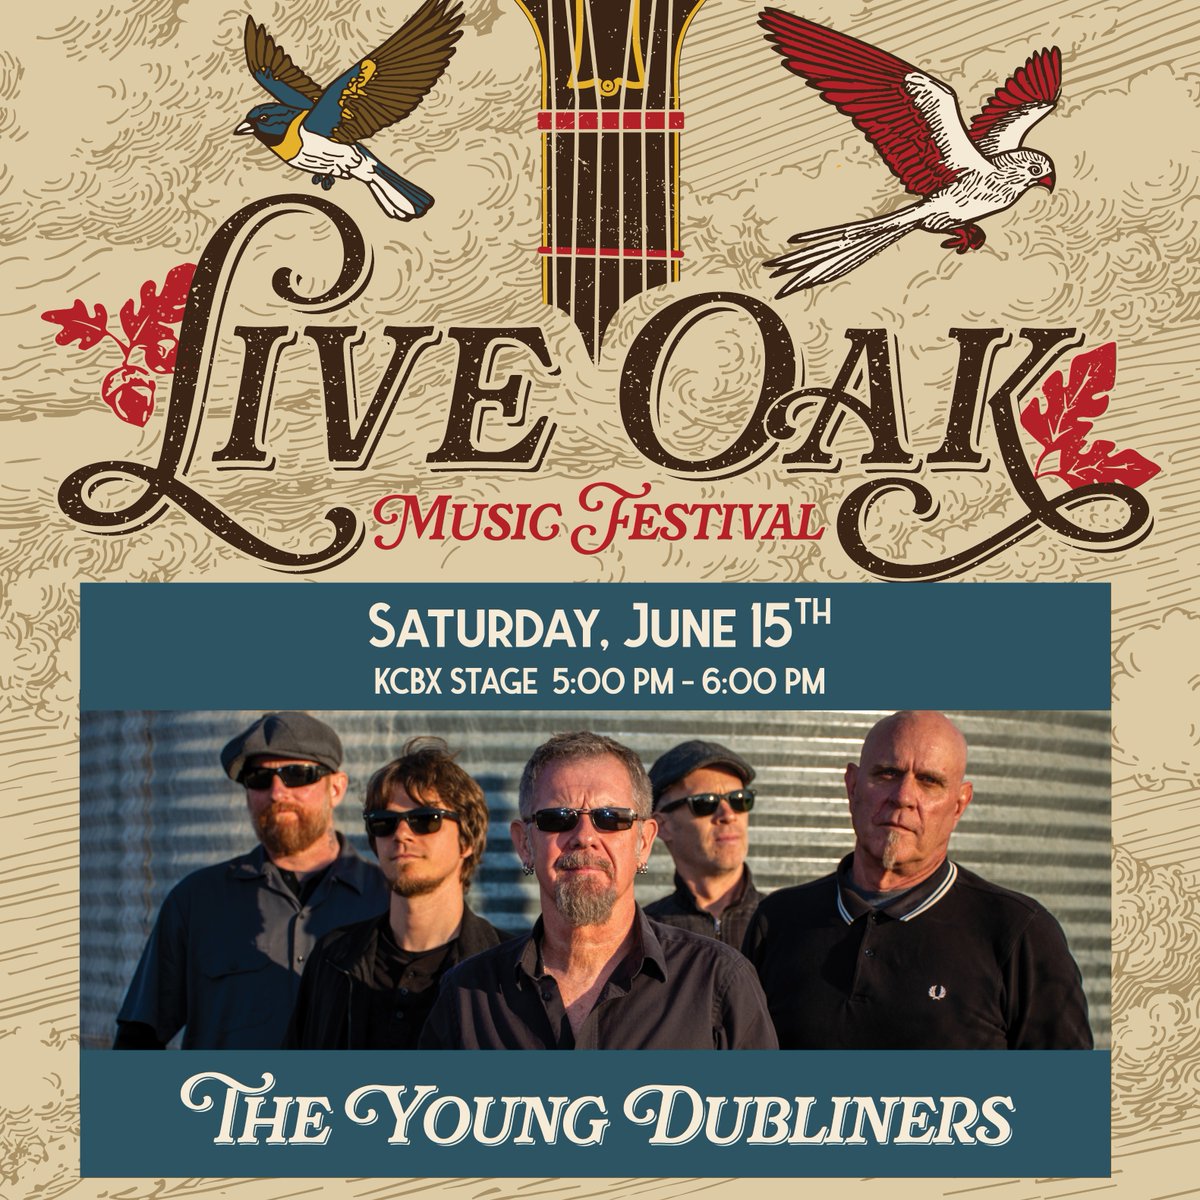 🎻 Day 2 of #BandWeek rocks on with the @YoungDubliners at #LiveOakMusicFest! Experience their unique Celtic Rock blend on June 15 at 5pm on the Main stage. Ready for a fusion that transcends? Details: liveoakfest.org/intertainment #KCBX